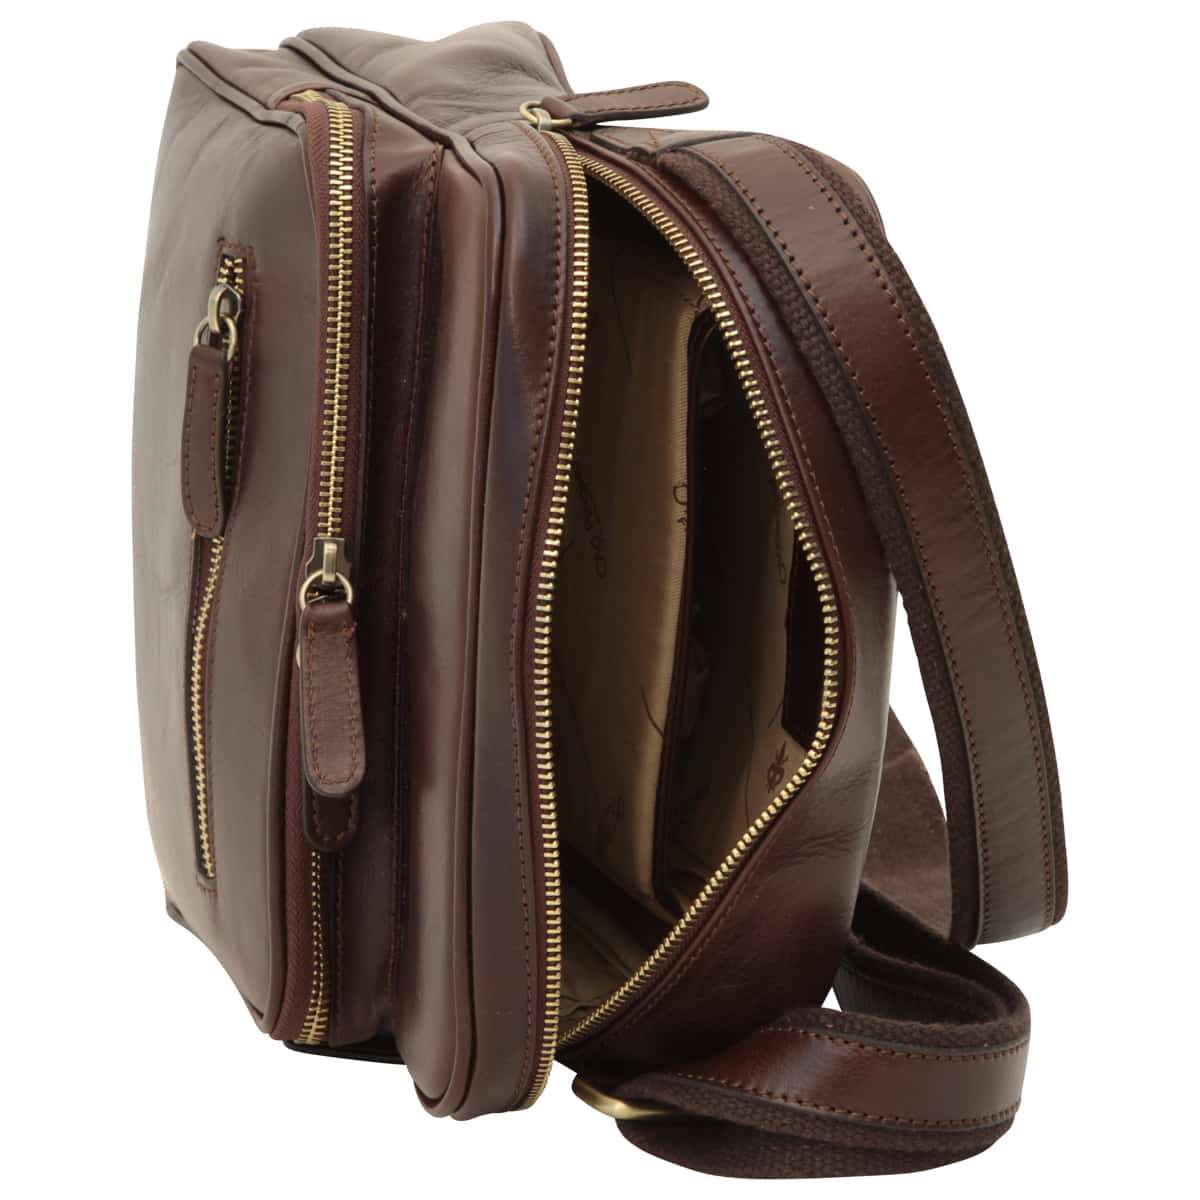 Small leather bag with zip closures - Dark Brown | 409389TM | EURO | Old Angler Firenze